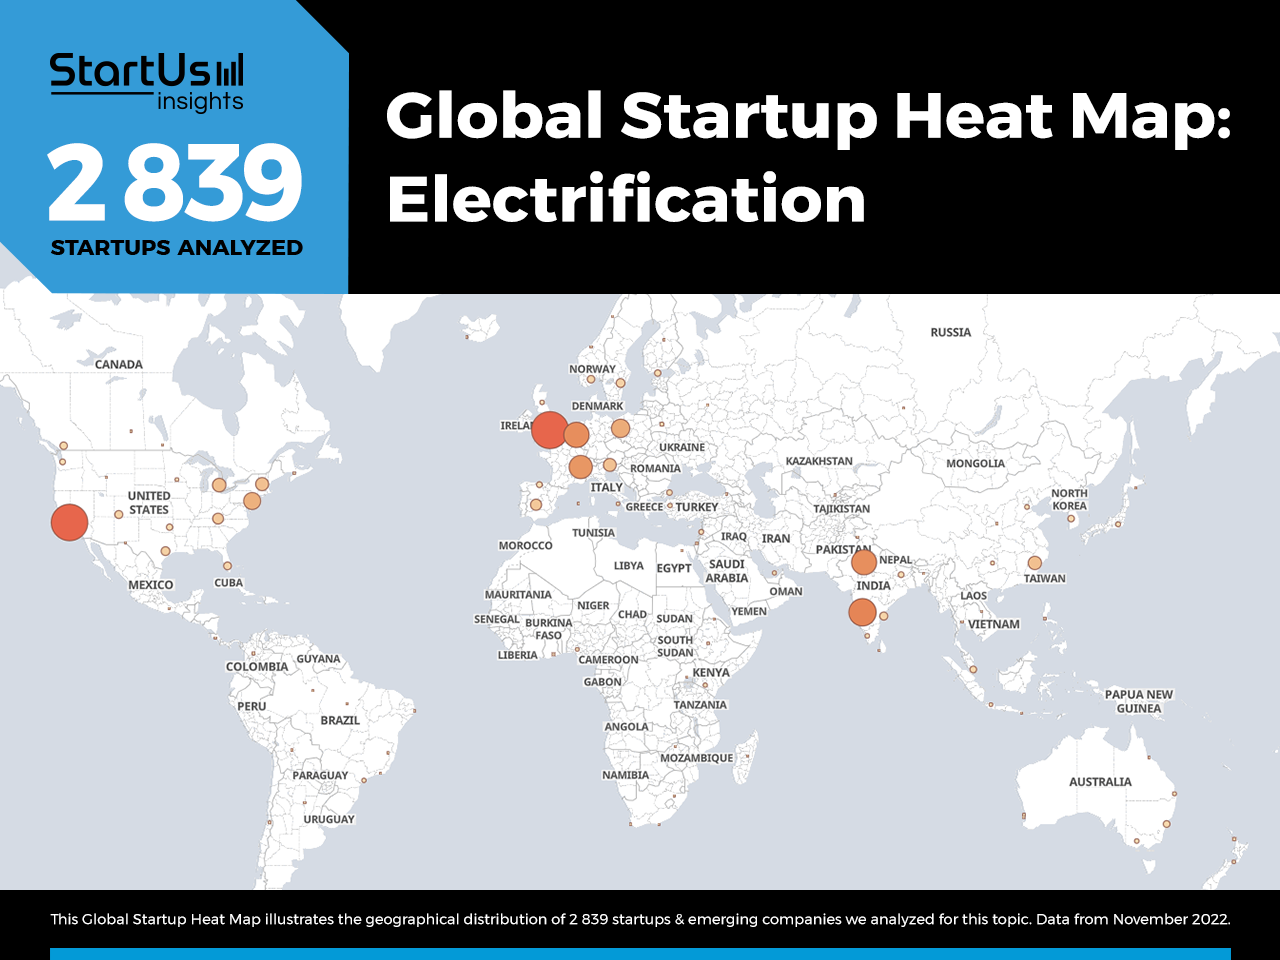 Electrification-trends-Heat-Map-StartUs-Insights-noresize copy